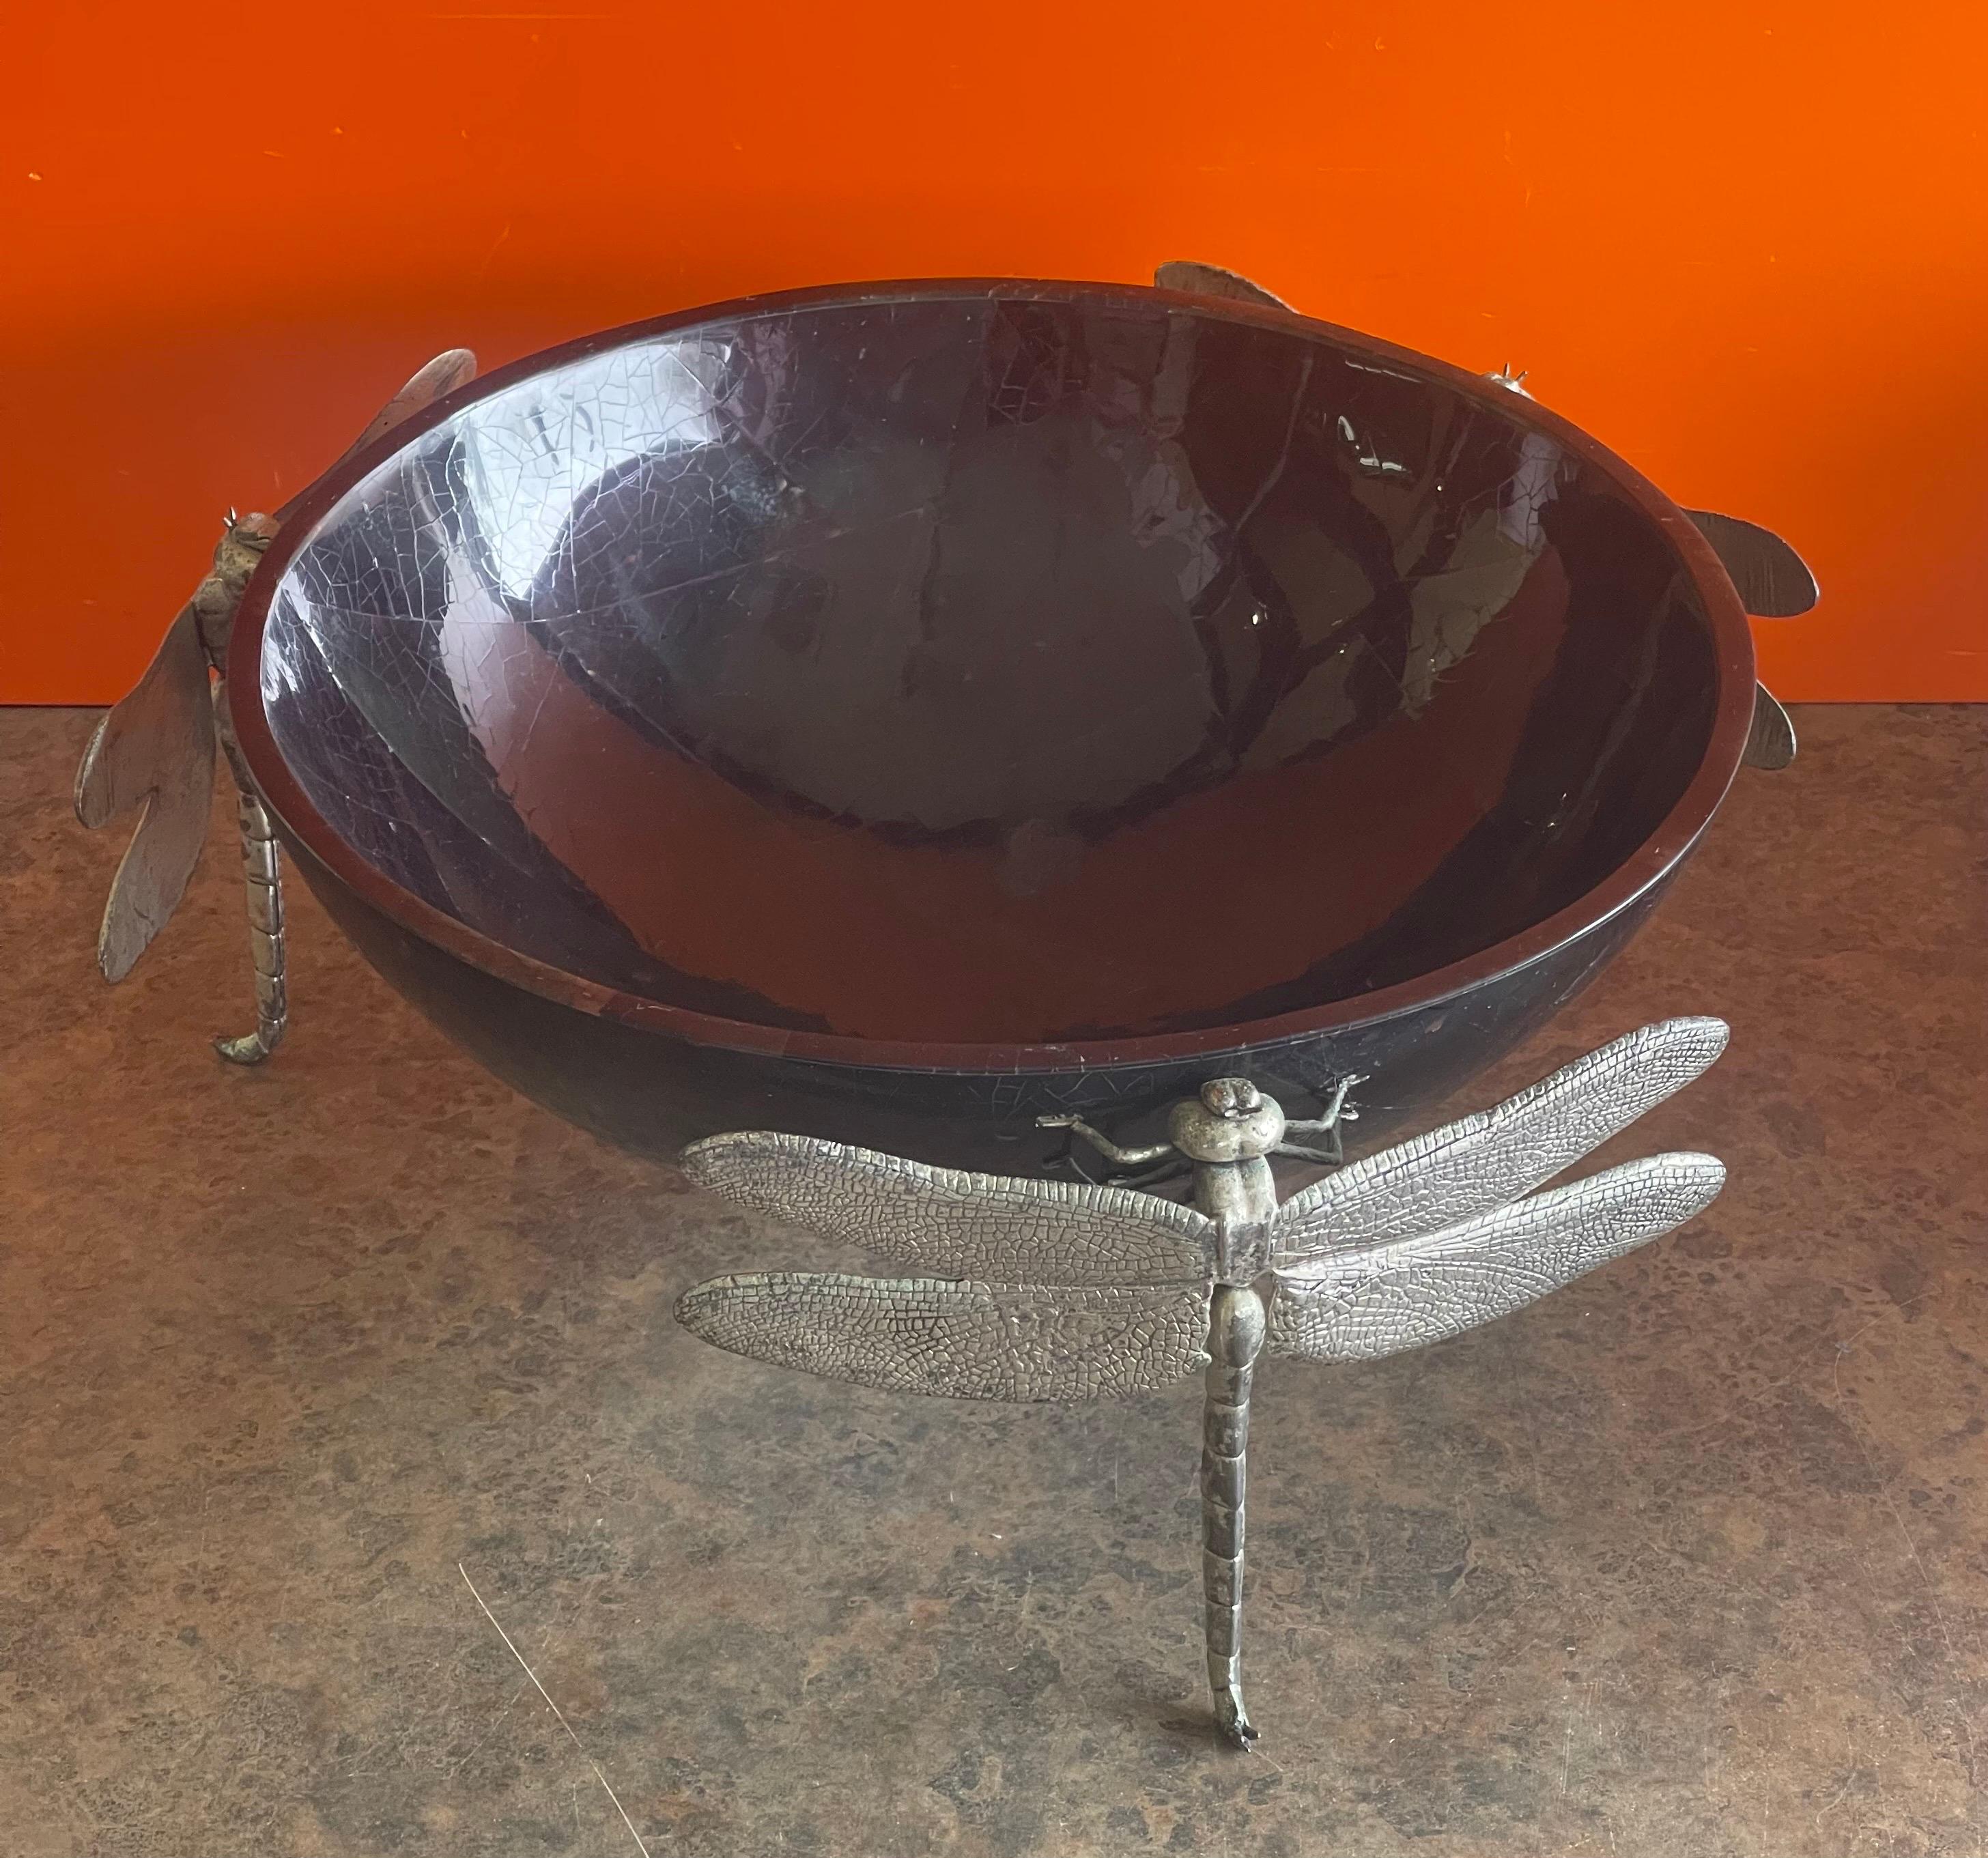 American Large Black Pen Shell Centerpiece Bowl with Dragonfly Feet